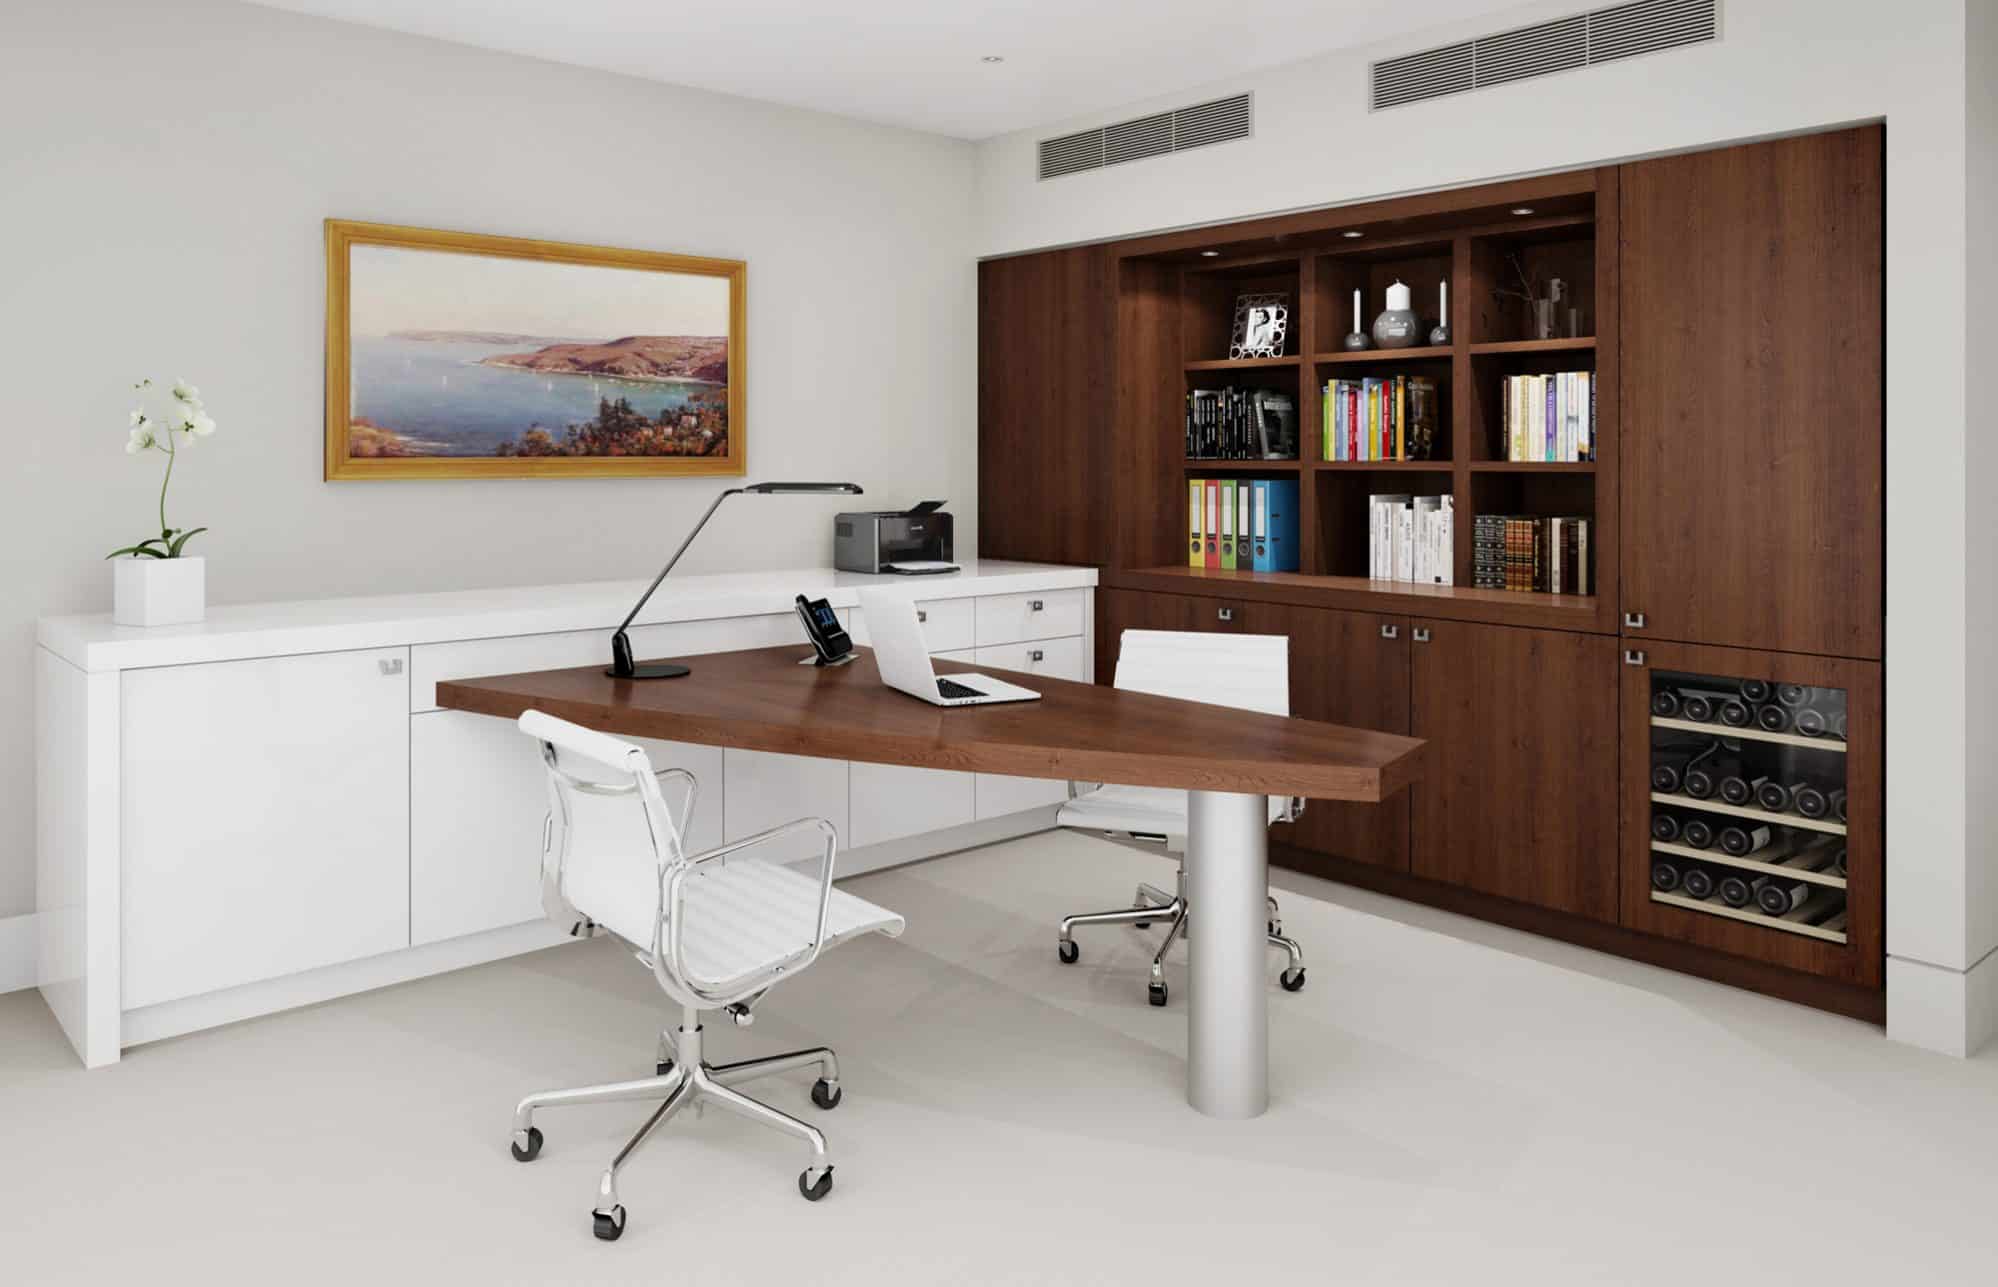 The design for the home office